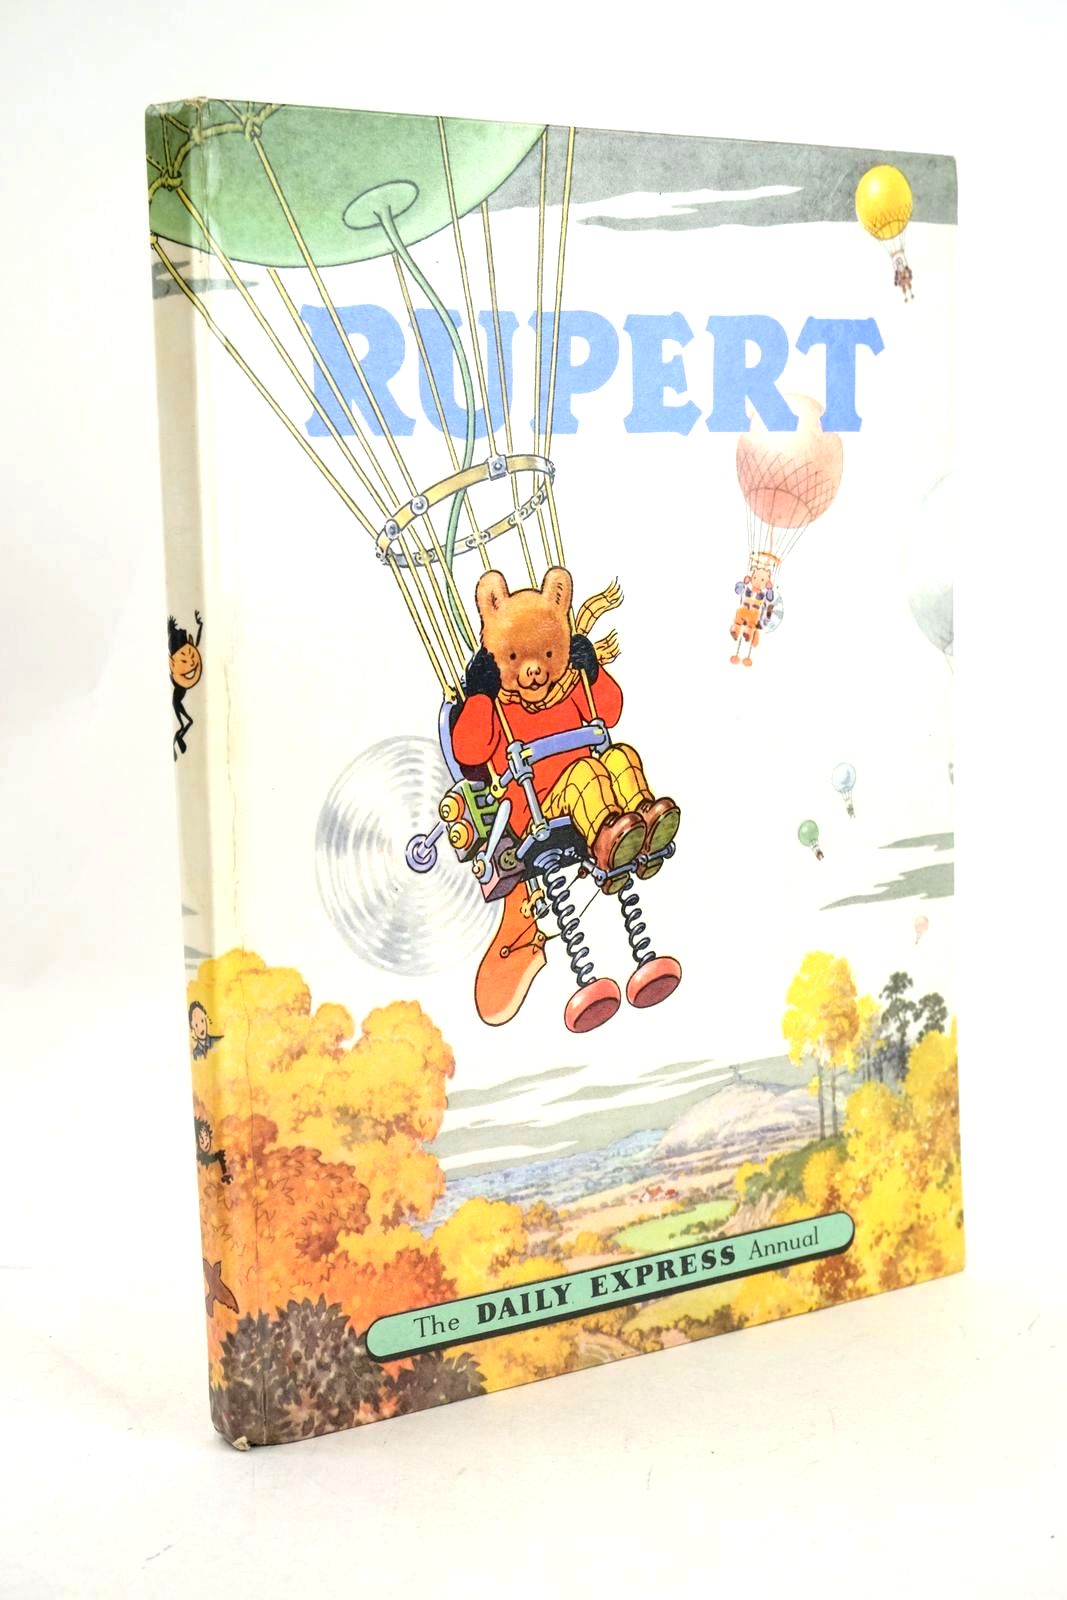 Photo of RUPERT ANNUAL 1957 written by Bestall, Alfred illustrated by Bestall, Alfred published by Daily Express (STOCK CODE: 1326802)  for sale by Stella & Rose's Books